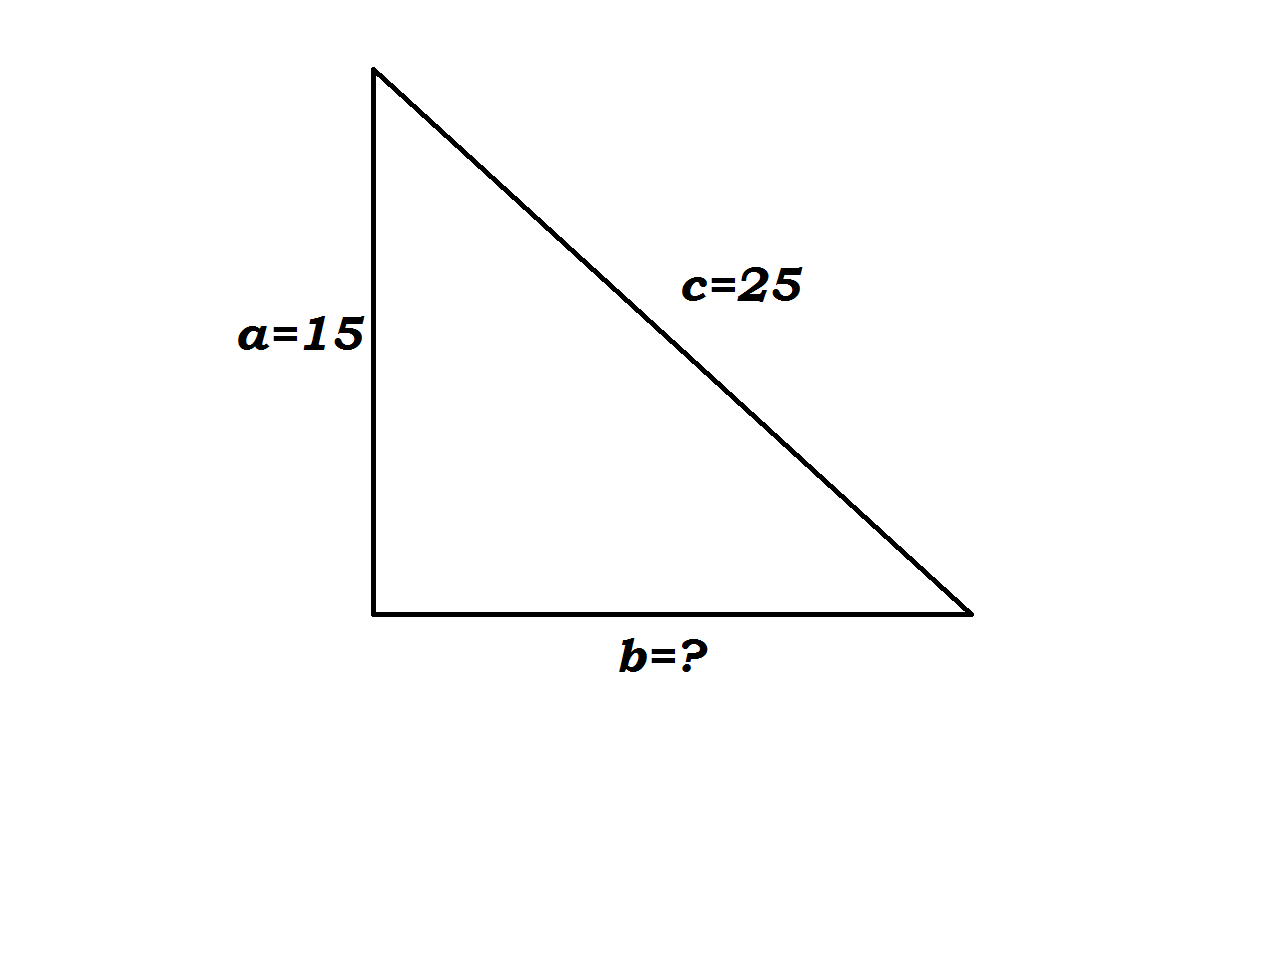 How do you use the Pythagorean Theorem to determine if the following  triangle with sides a, b, & c is a right triangle: a=5, b=10, c=15?